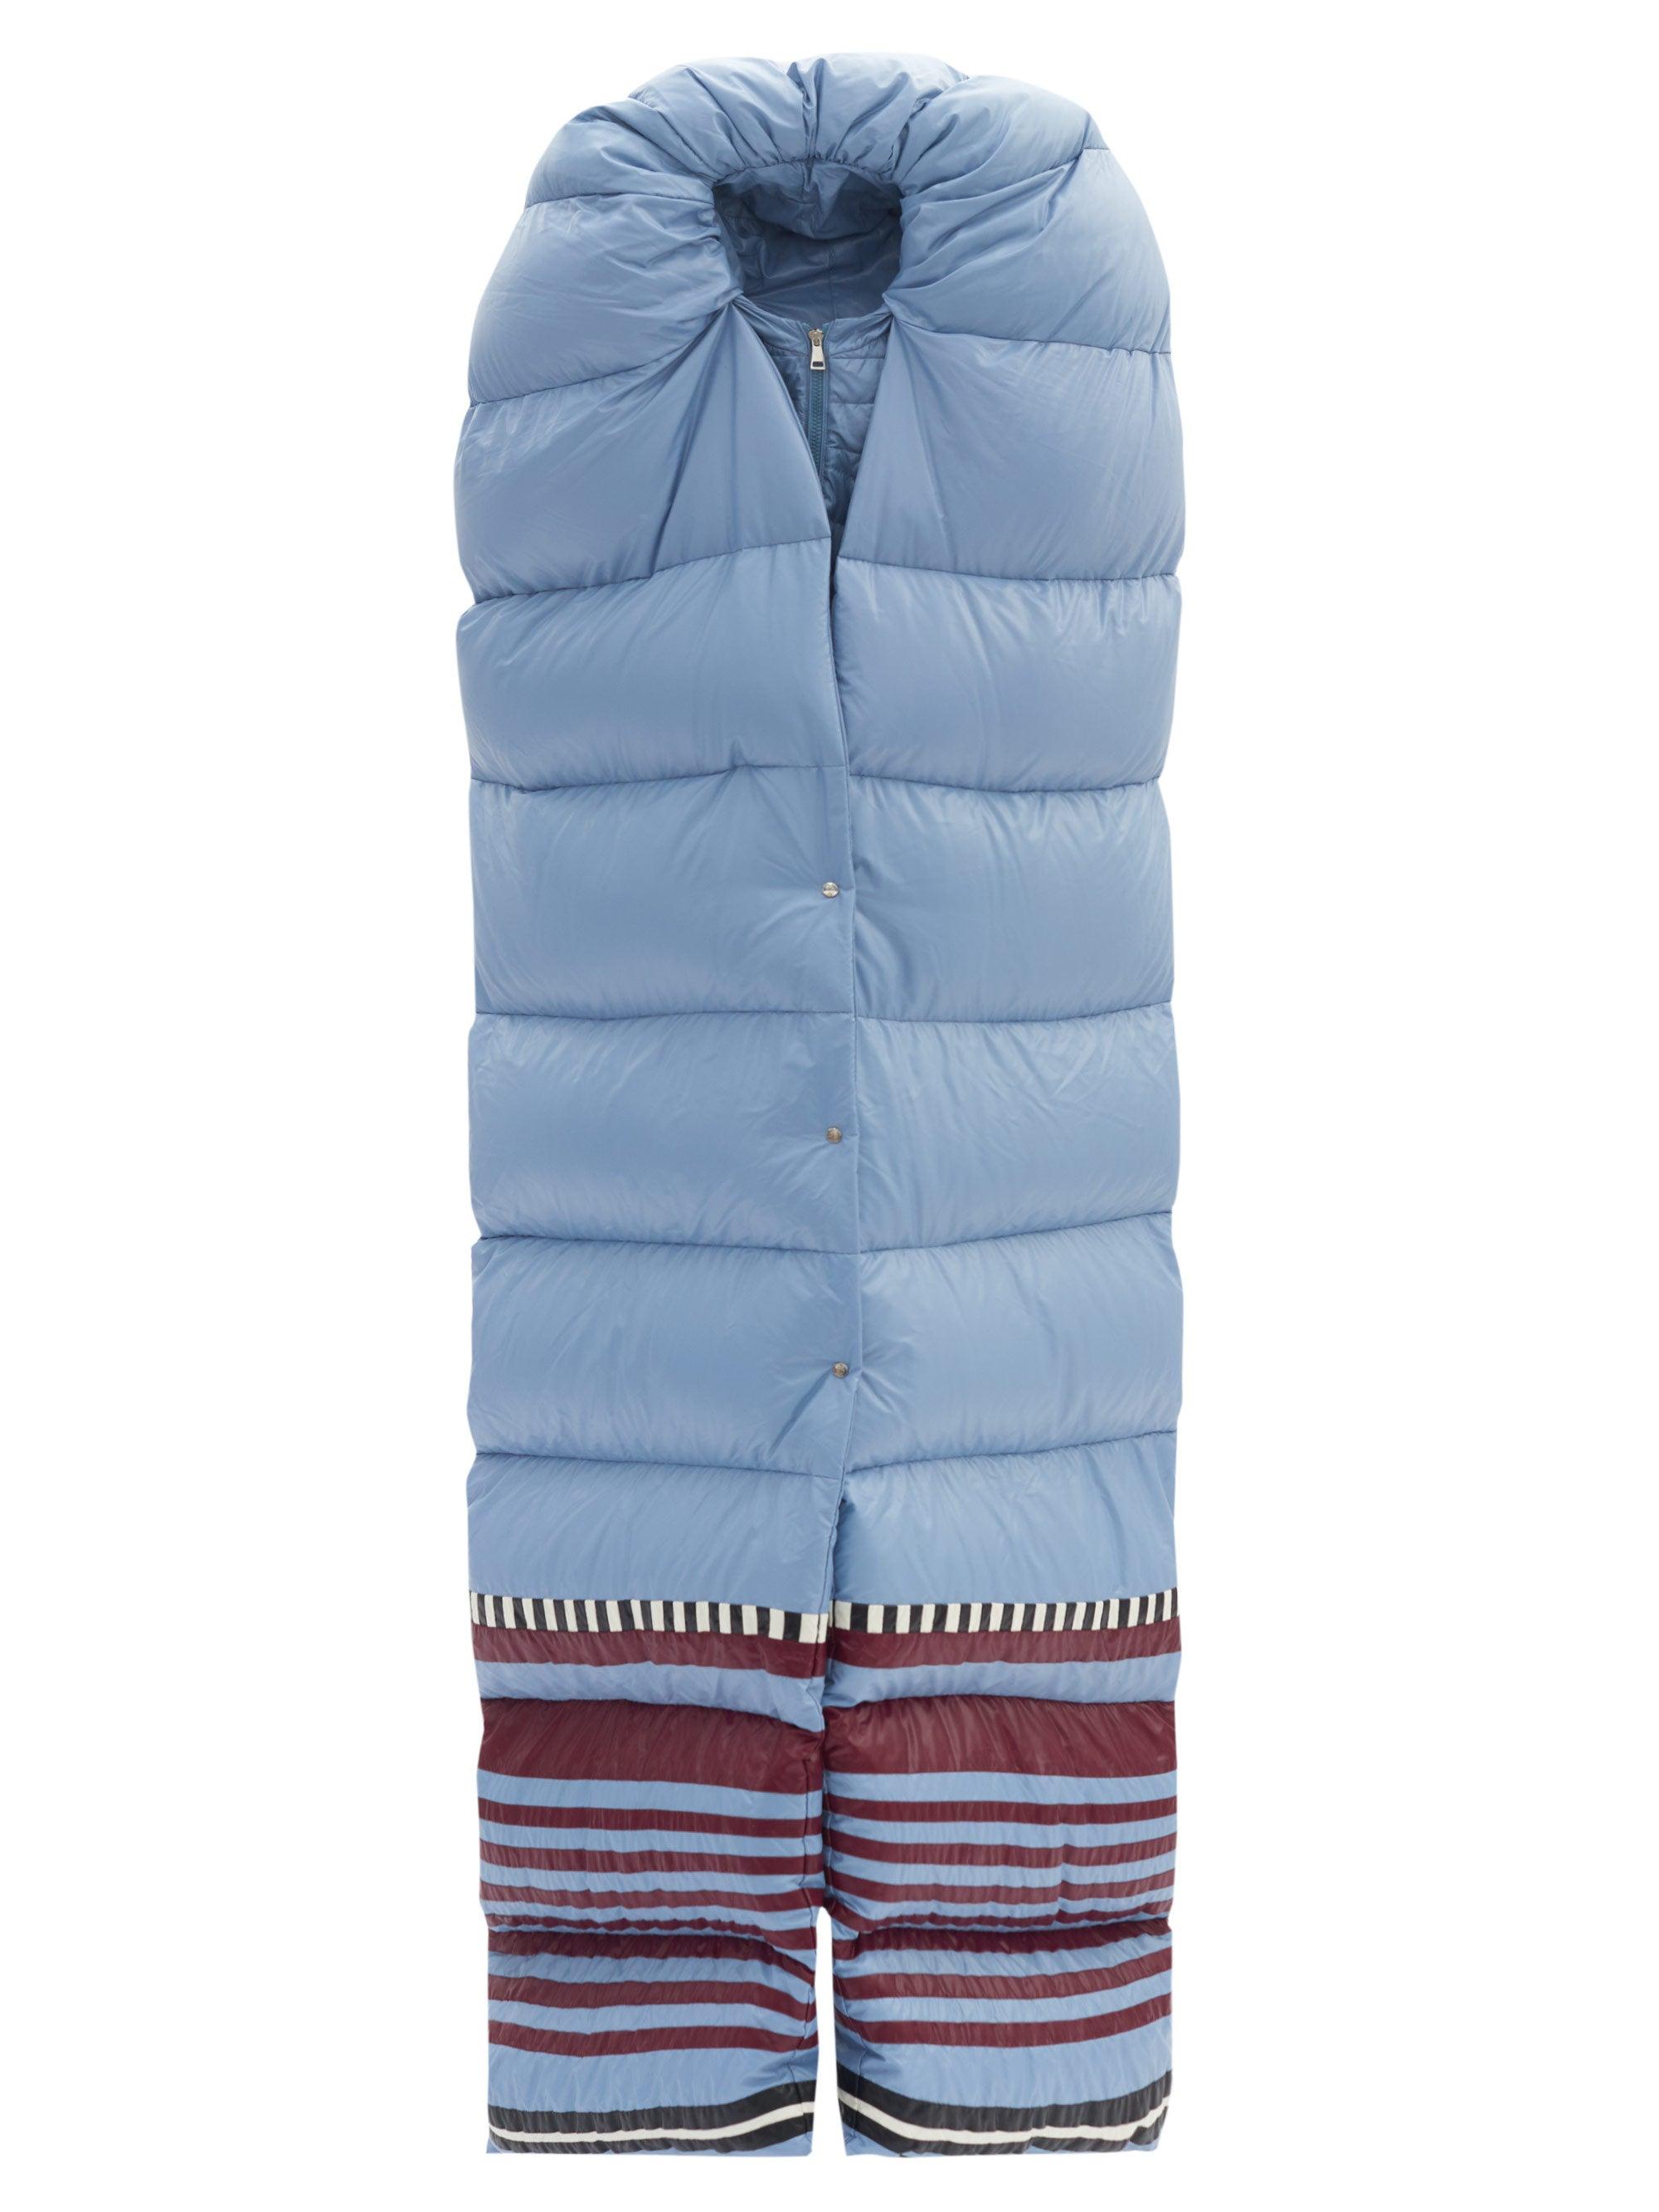 1 MONCLER PIERPAOLO PICCIOLI Adelaide Striped-hem Padded-scarf Jacket in  Light Blue (Blue) | Lyst